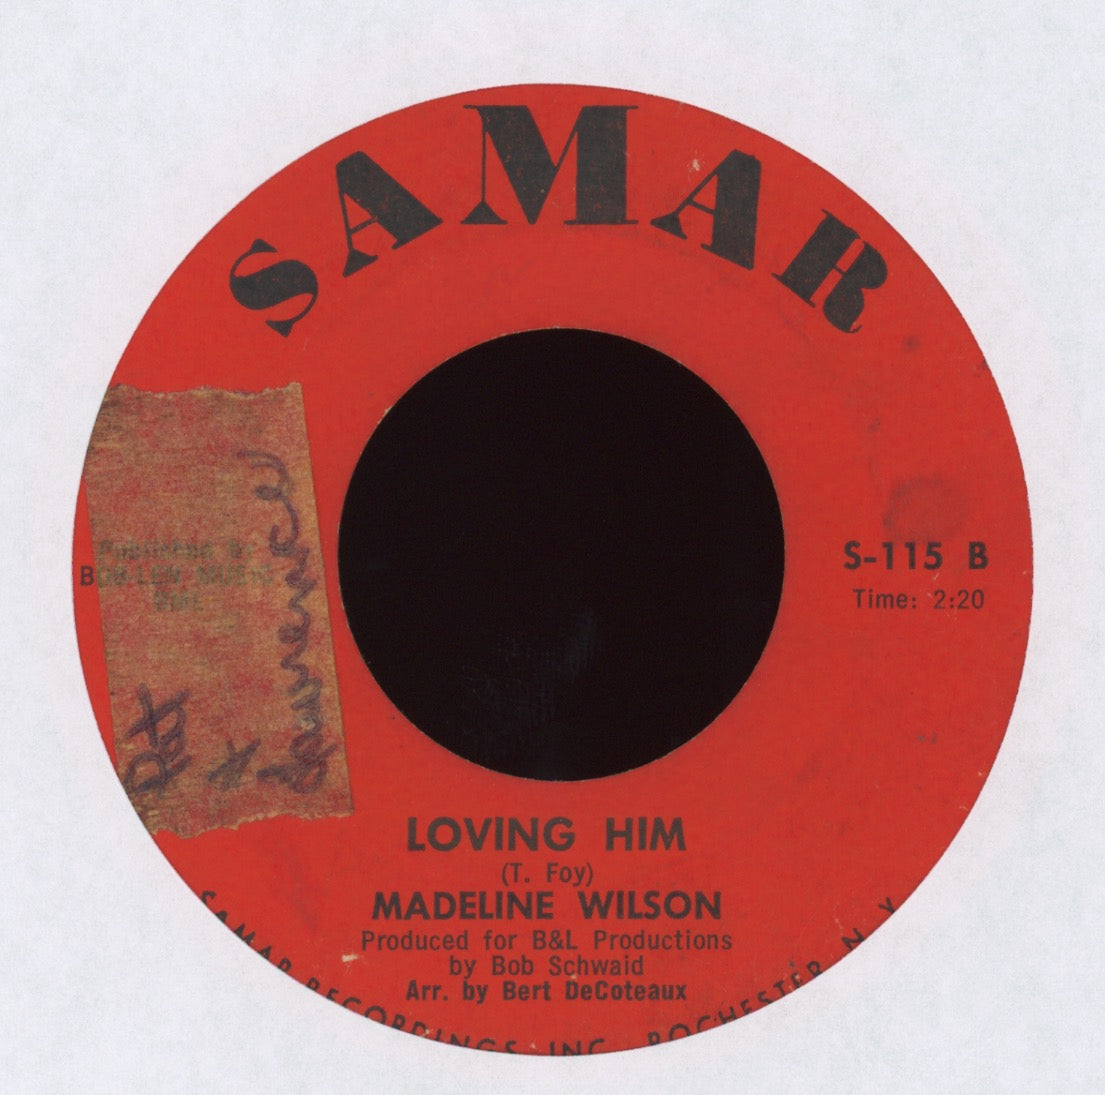 Madeline Wilson - Dial "L" For Lonely on Samar